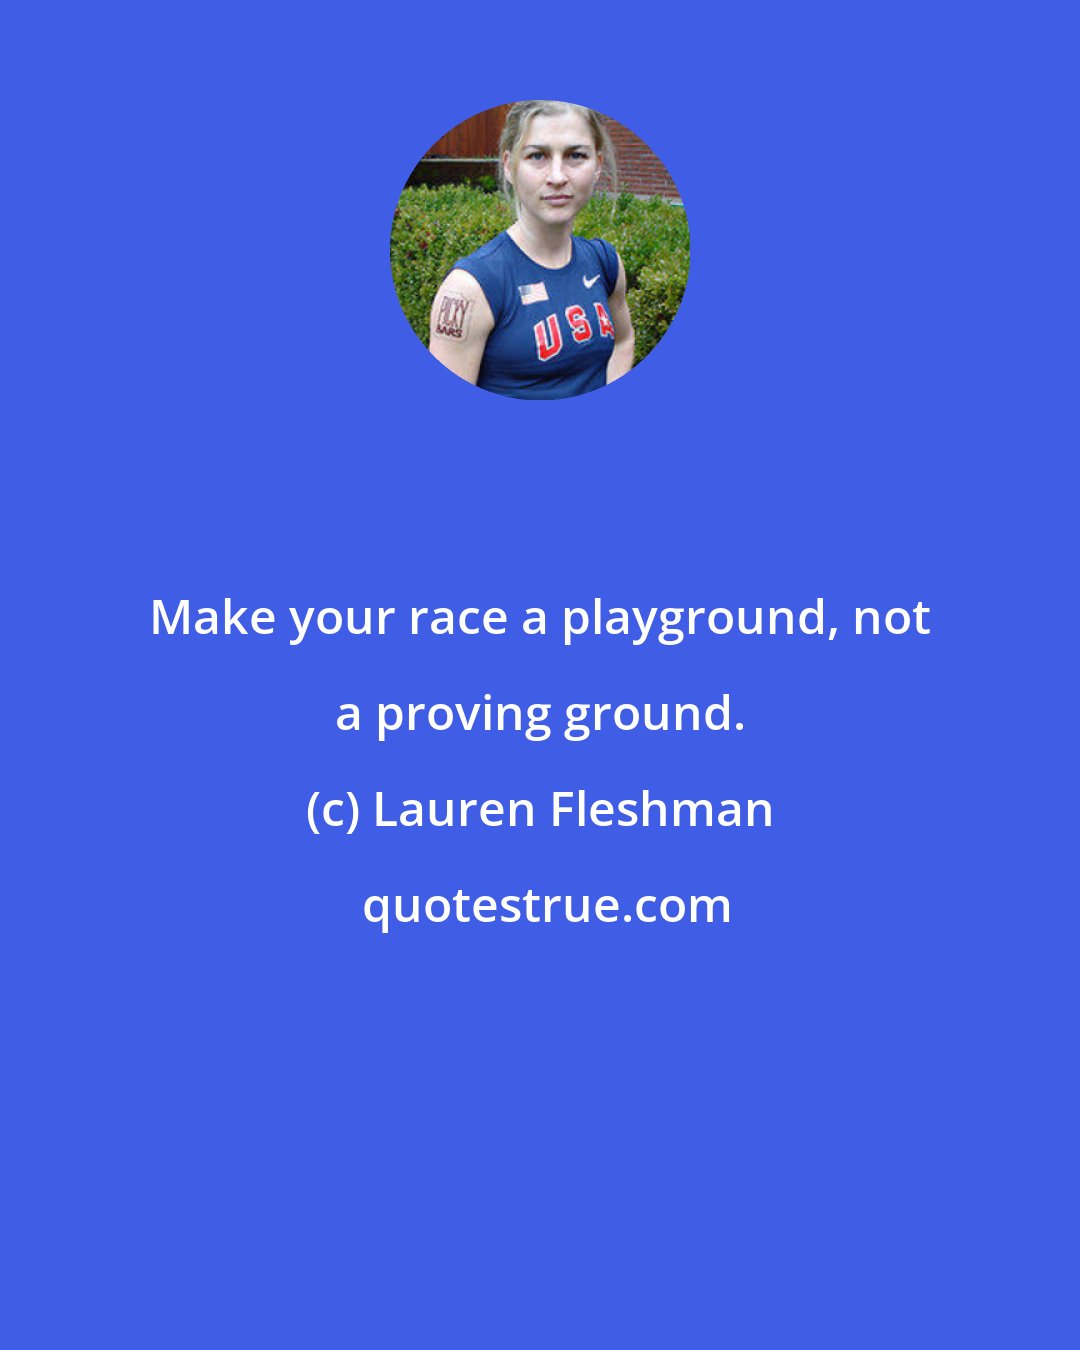 Lauren Fleshman: Make your race a playground, not a proving ground.